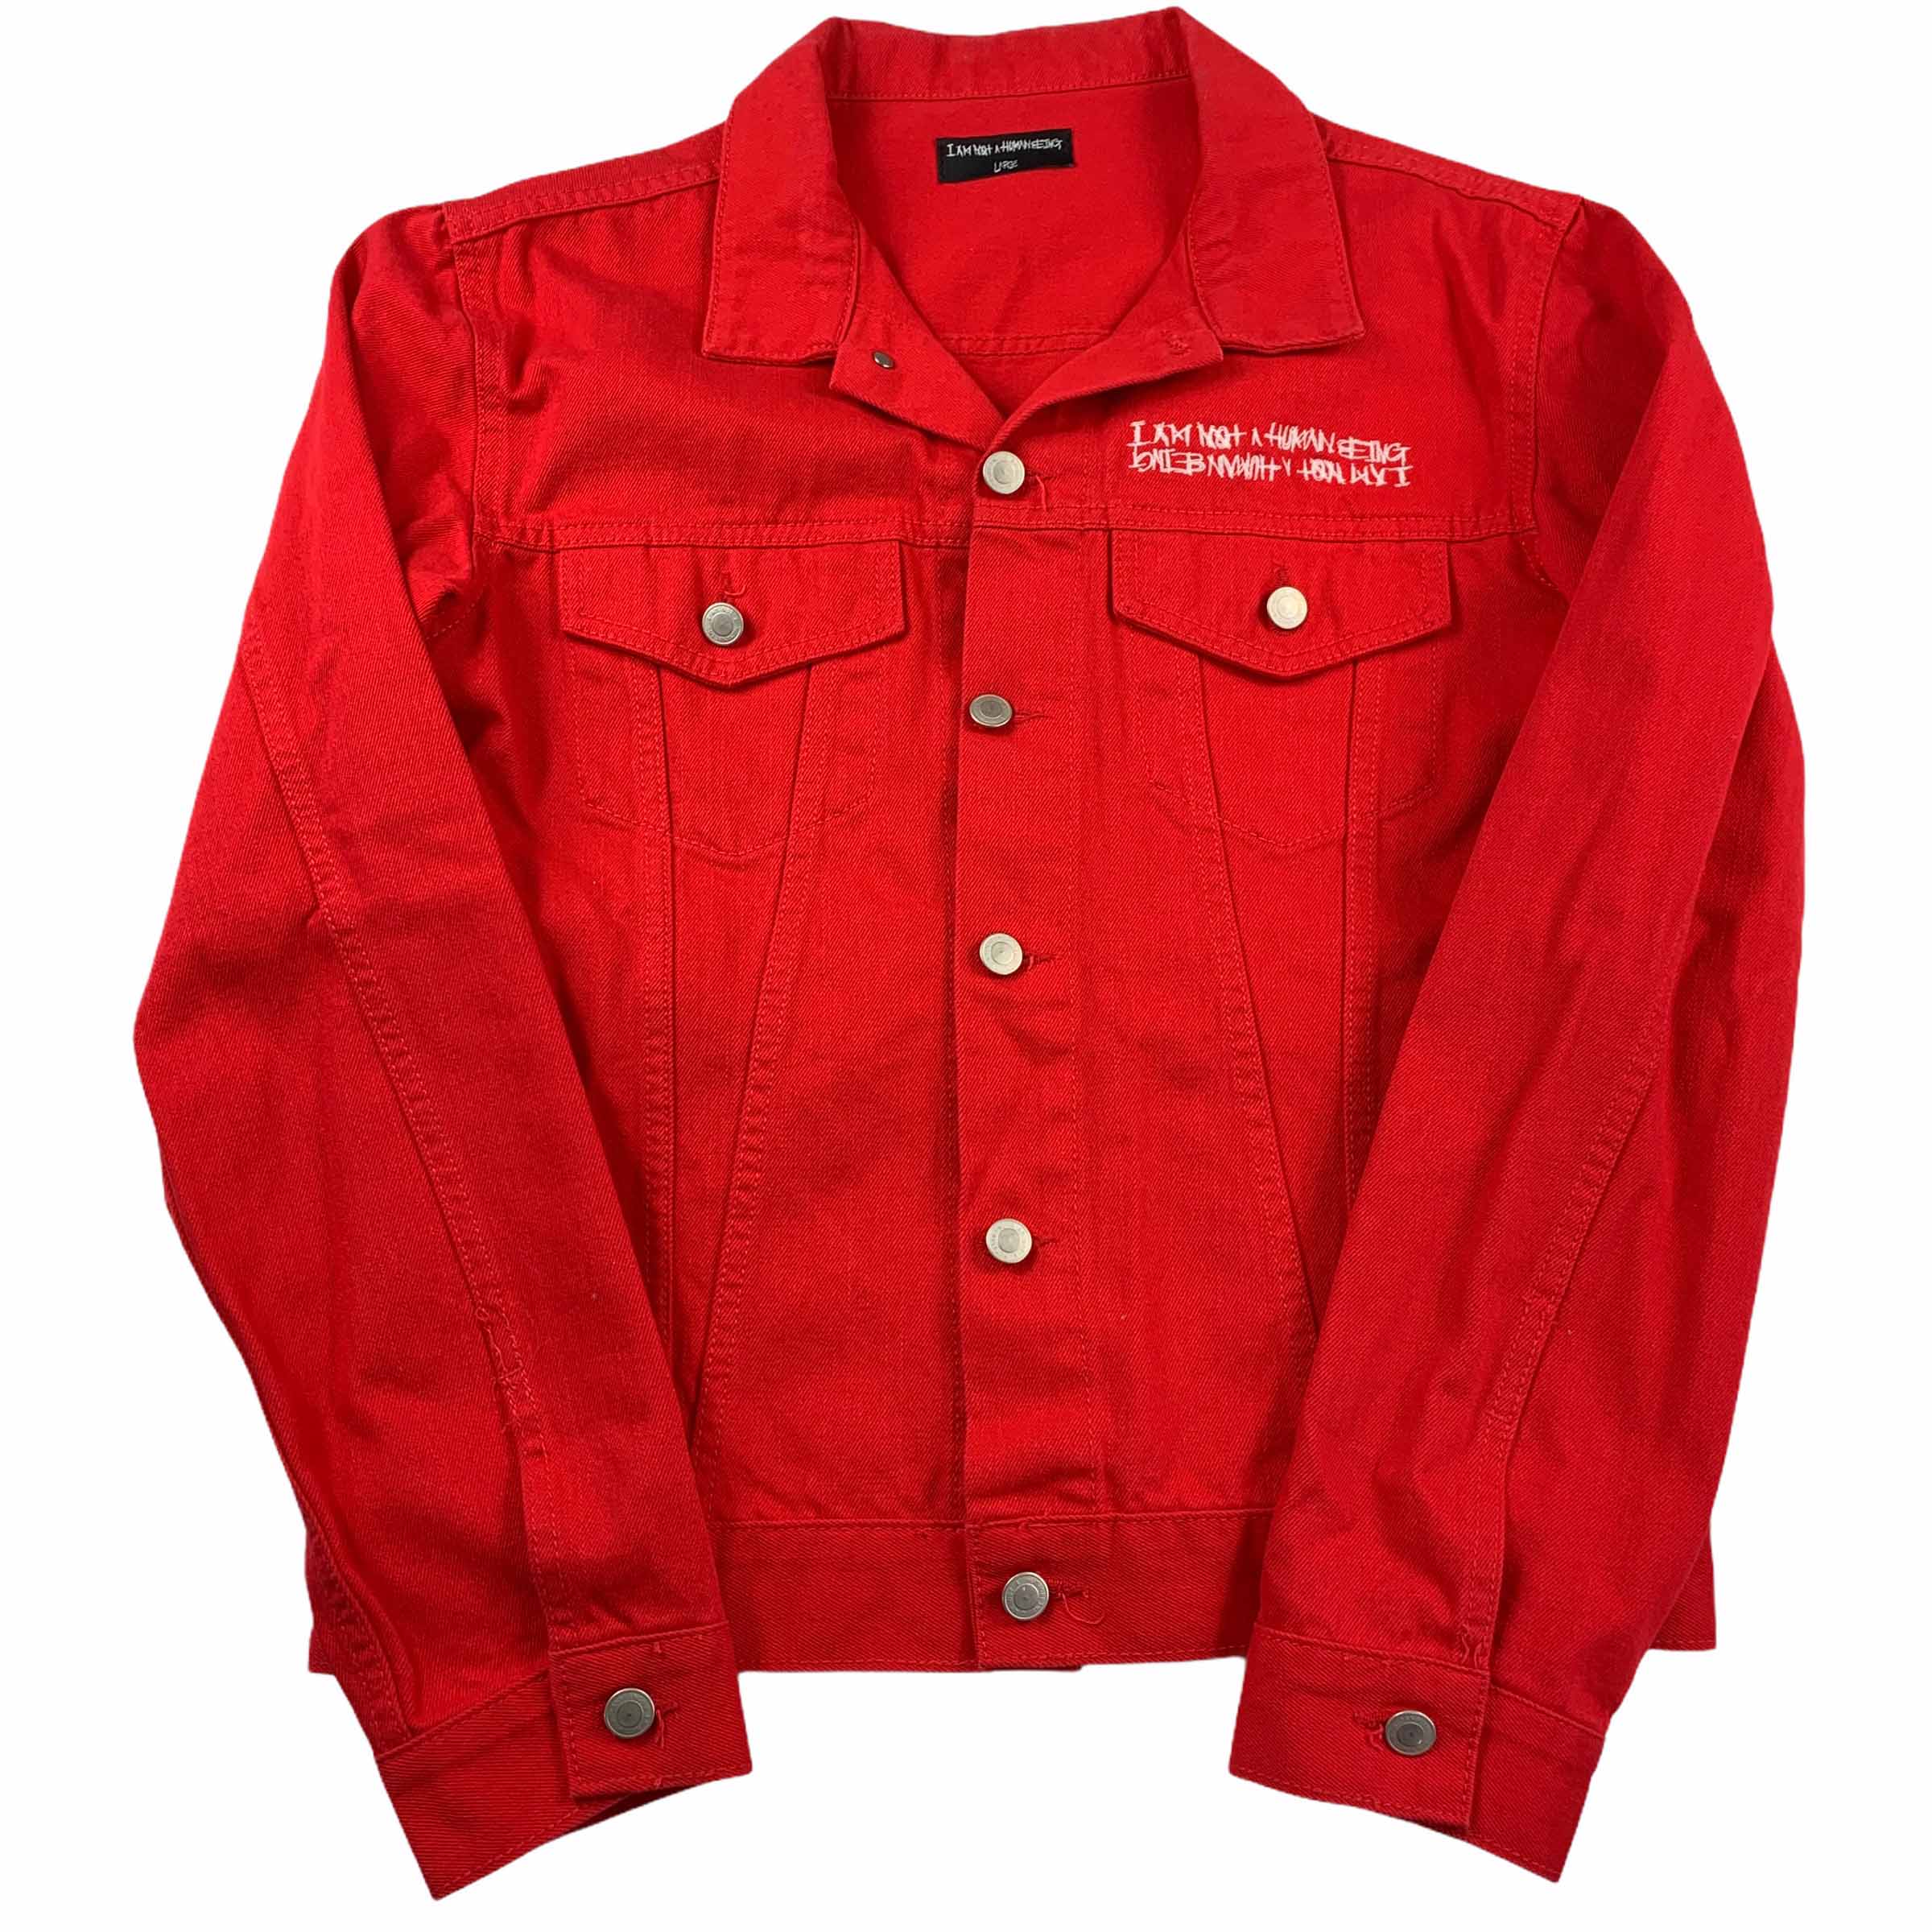 [I AM NOT A HUMAN BEING] Trucker Jacket RED - Size L